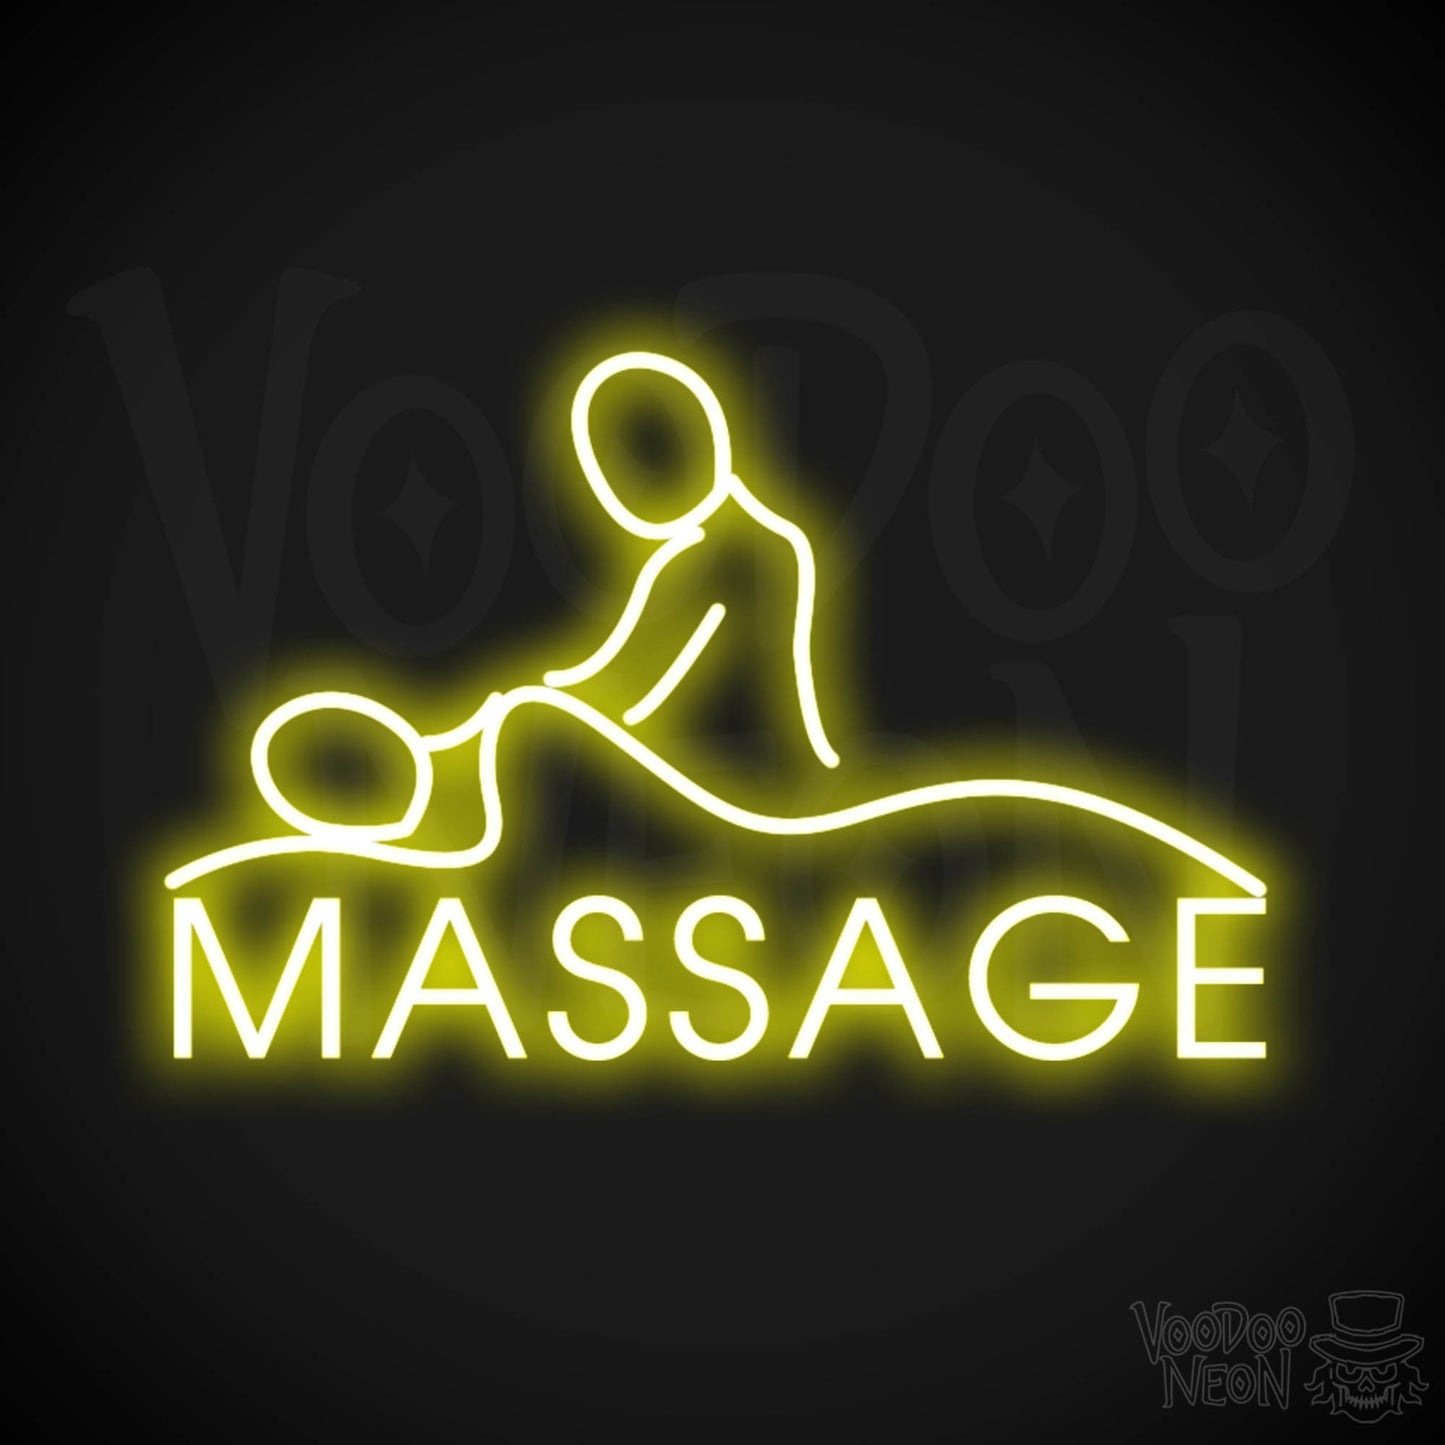 Massage Neon Sign - Neon Massage Sign - Massage Light Up Sign - Color Yellow